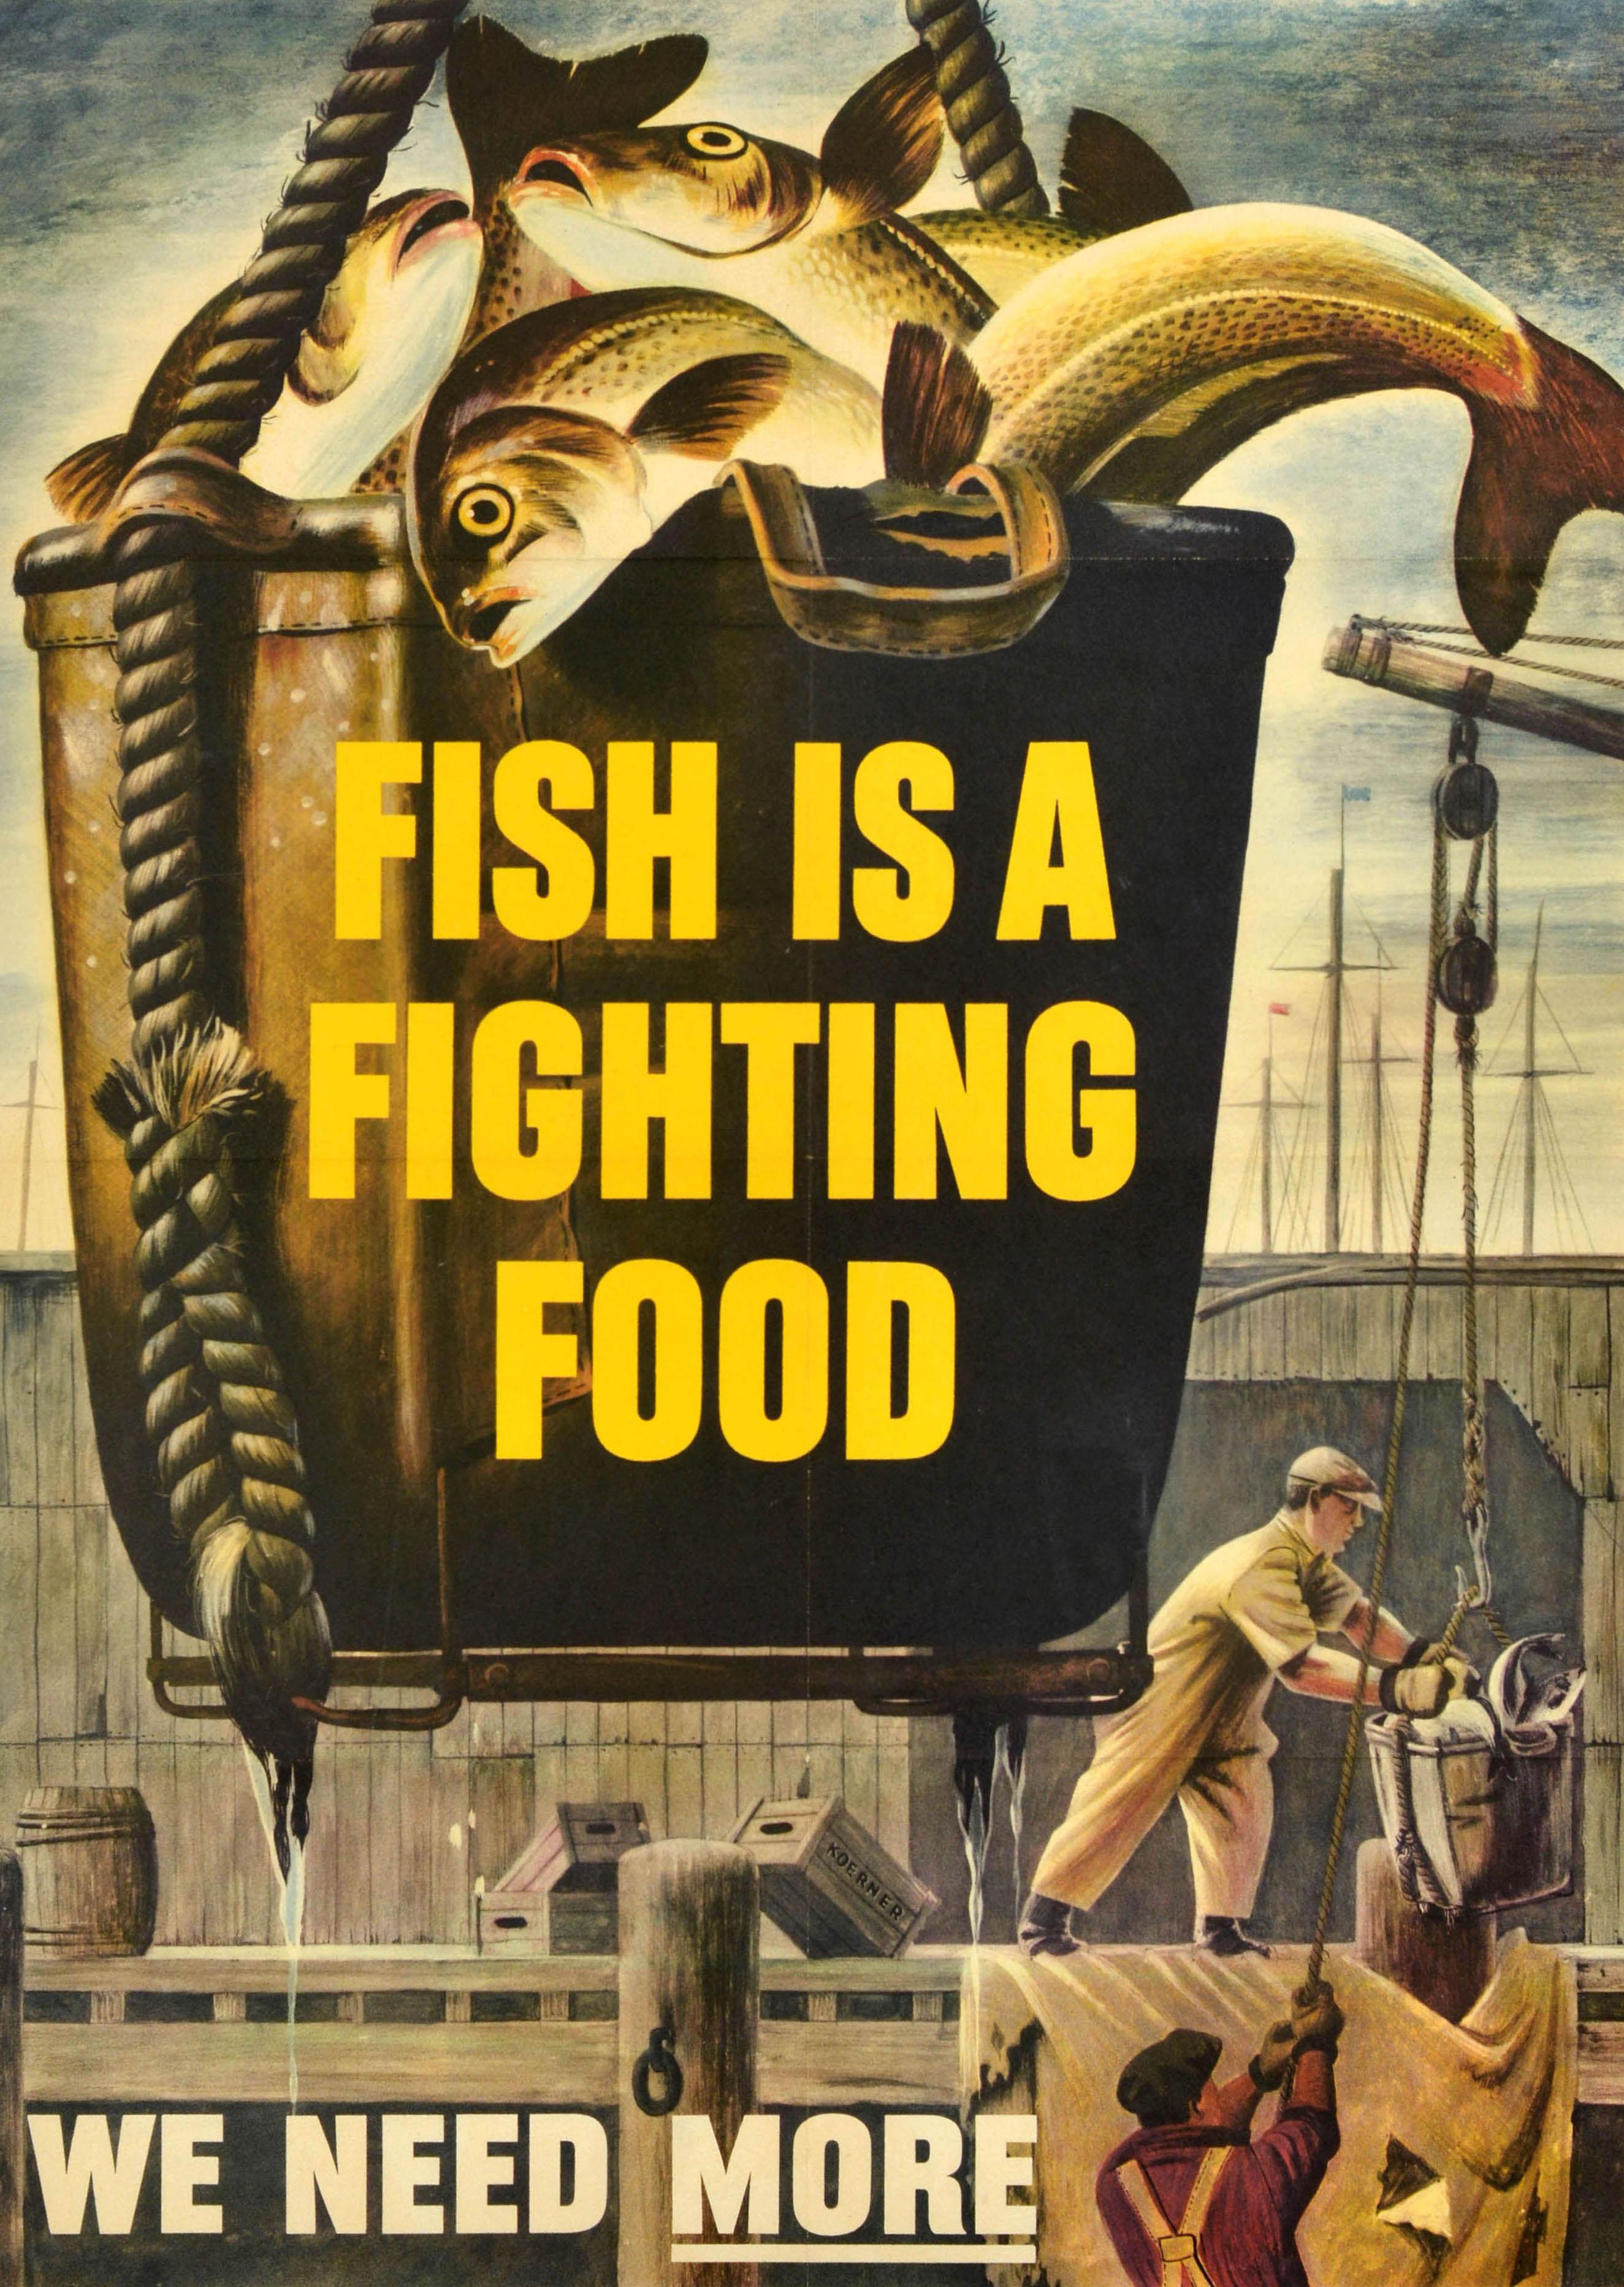 Original vintage World War Two home front poster - Fish is a fighting food We need more - featuring an image of a catch of fish being hauled in a bucket by fishermen working on a wooden dock with masts visible in the background and the bold title